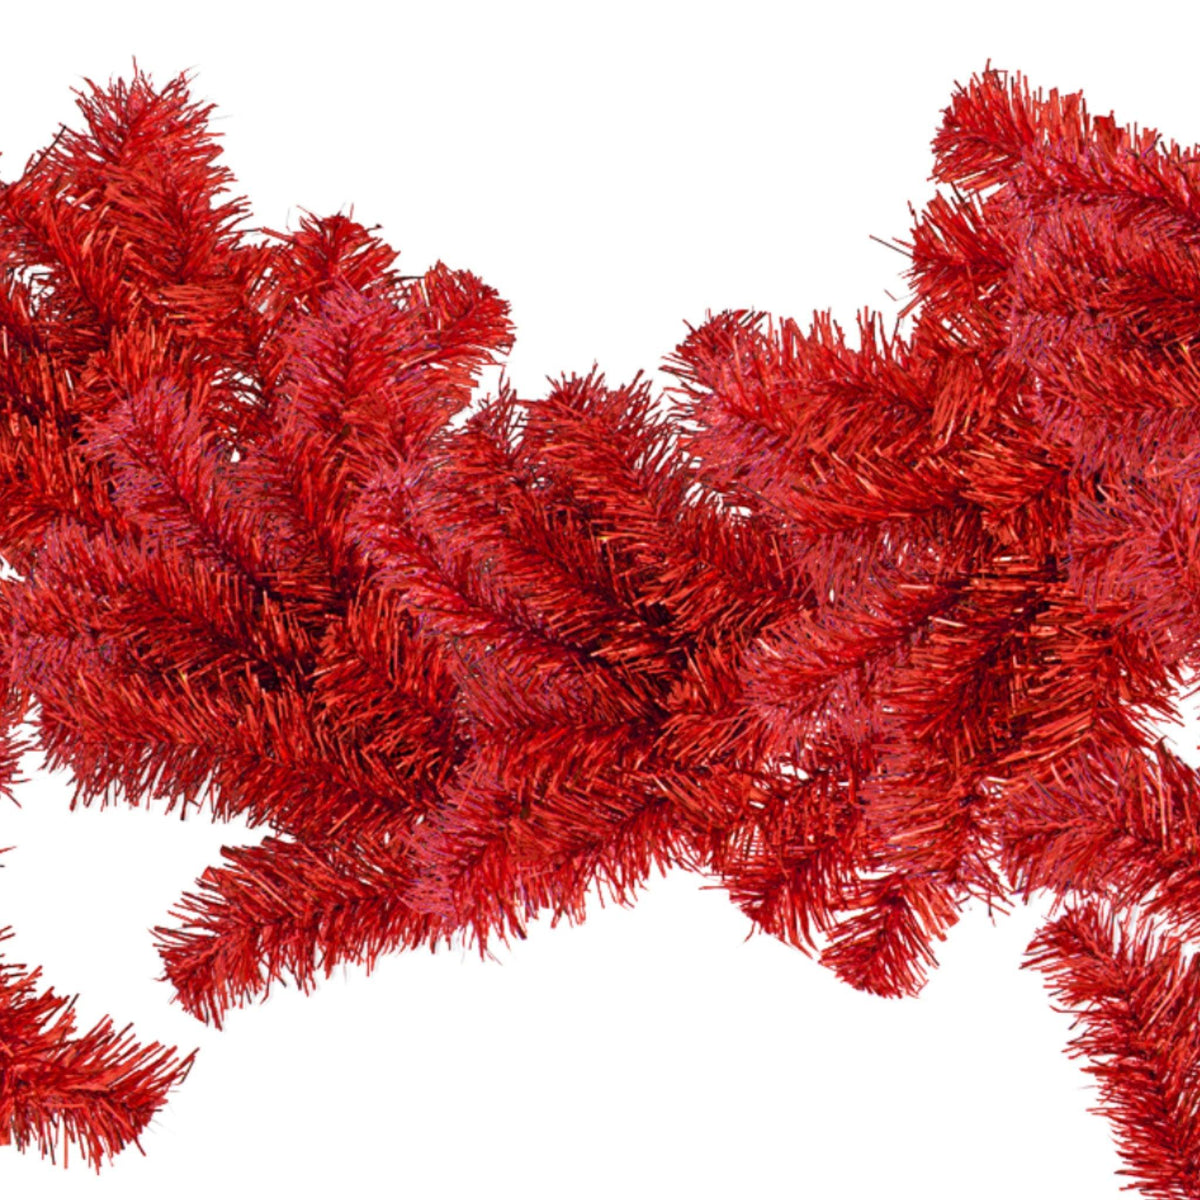 Shop for Lee Display's brand new 6FT Shiny Metallic Red Tinsel Brush Garlands on sale now at leedisplay.com.  Middle section